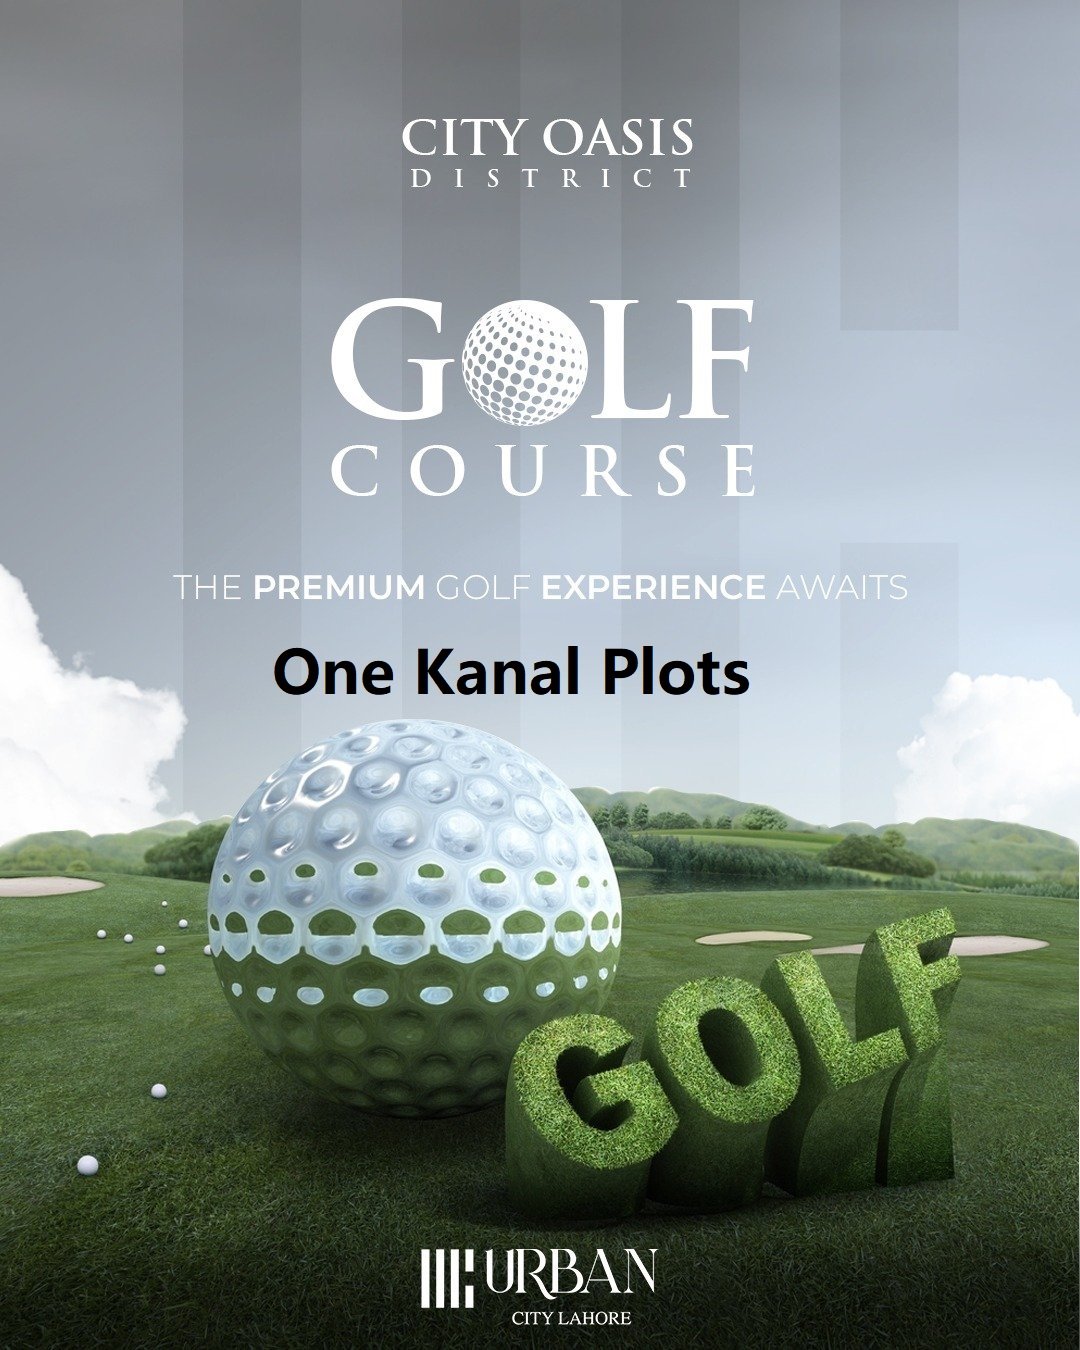 Urban City Lahore Offers Golf Facing One Kanal Plots For Booking